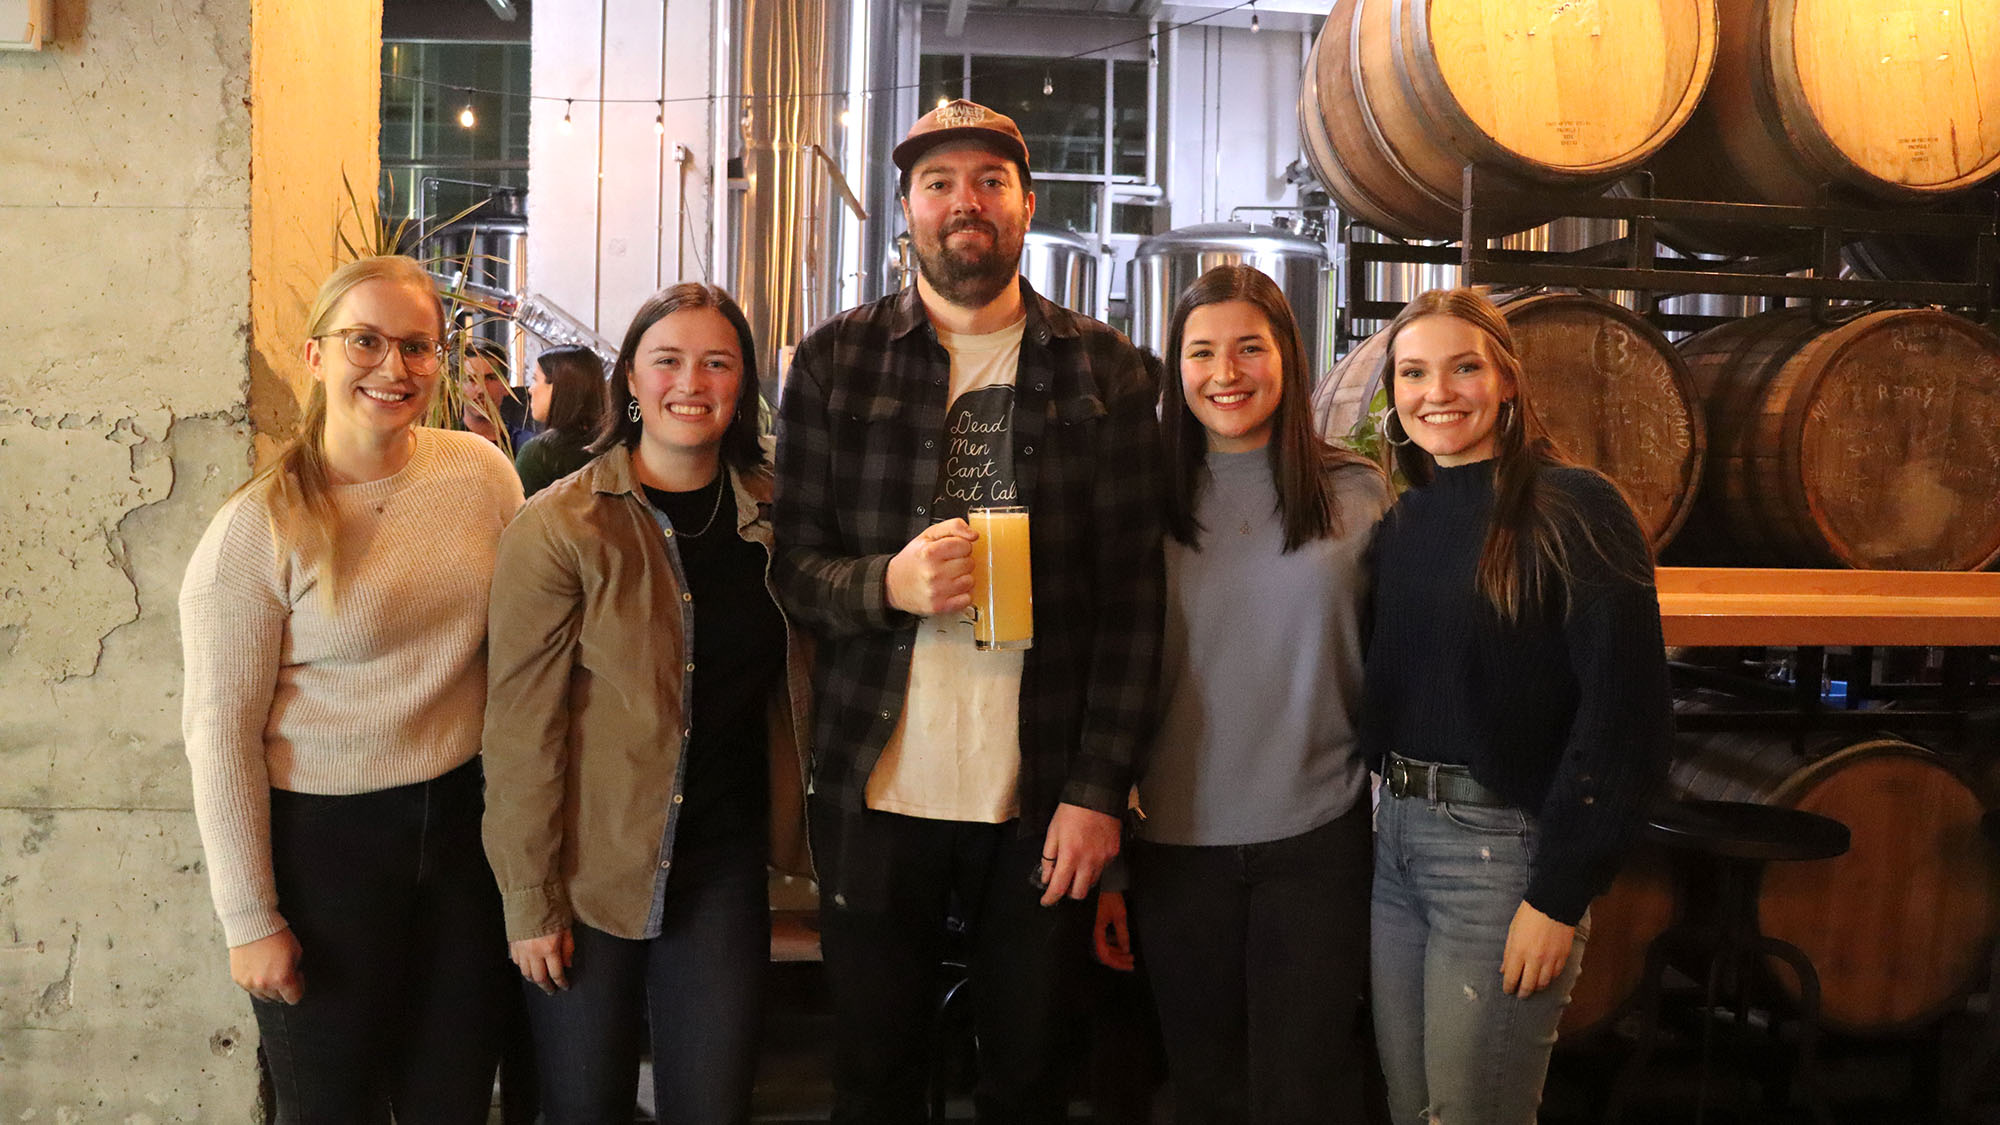 From left to right are Jessica Daigle, Kristin Clarke, Eric Daponte, Emma Logan, and Lindsey Burgess at 2 Crows brewery on Thursday night.